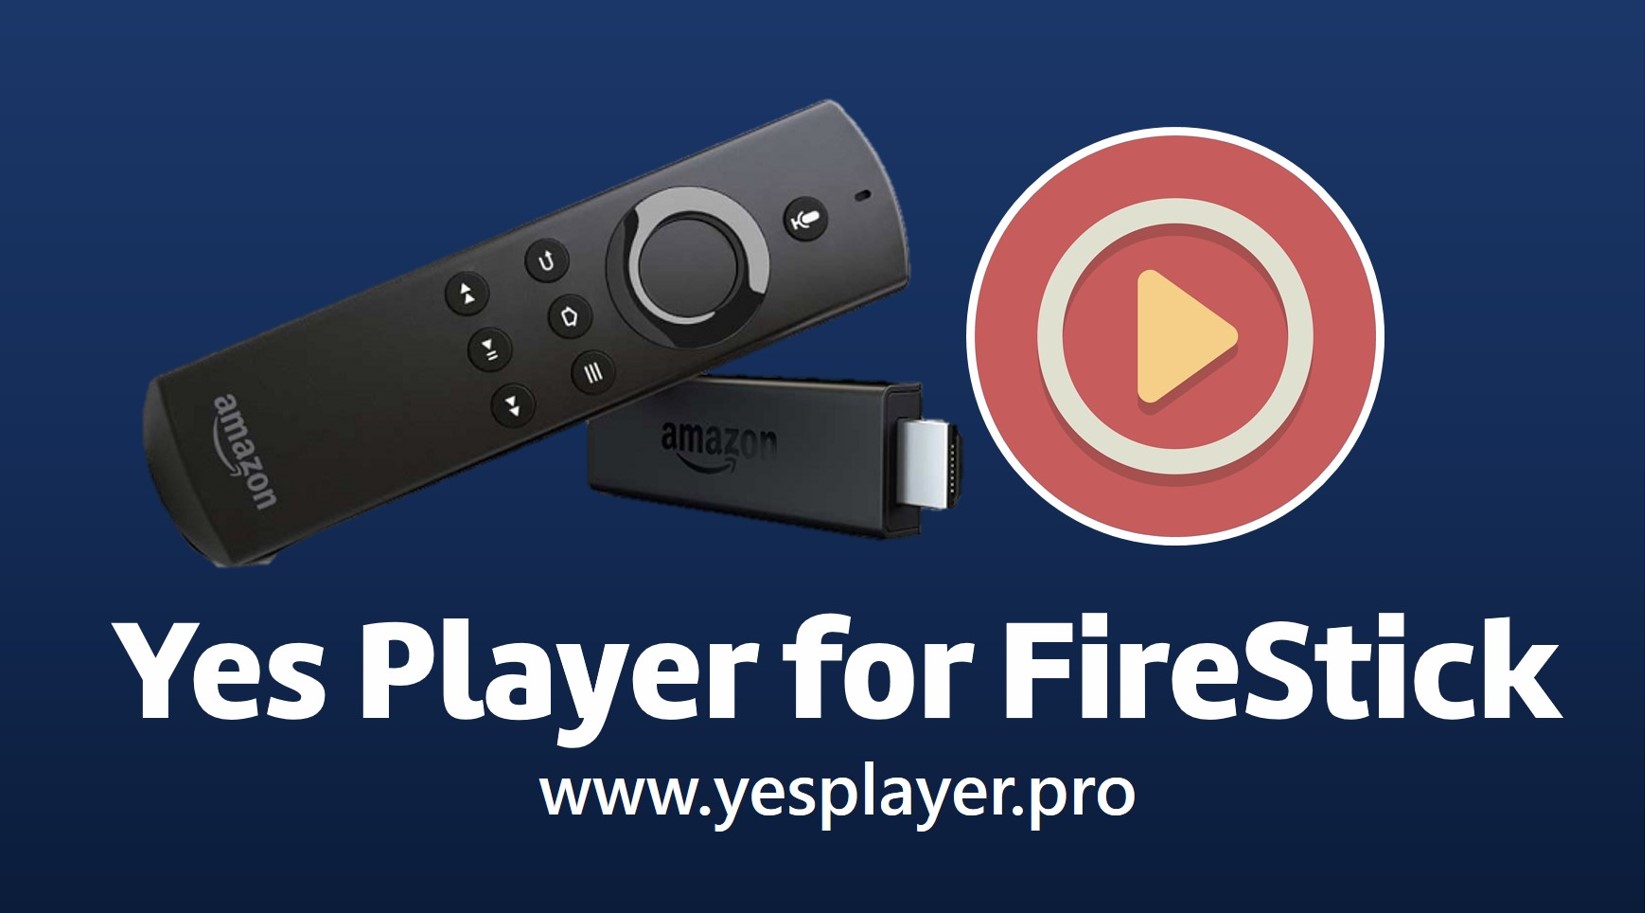 Yes Player for Firestick